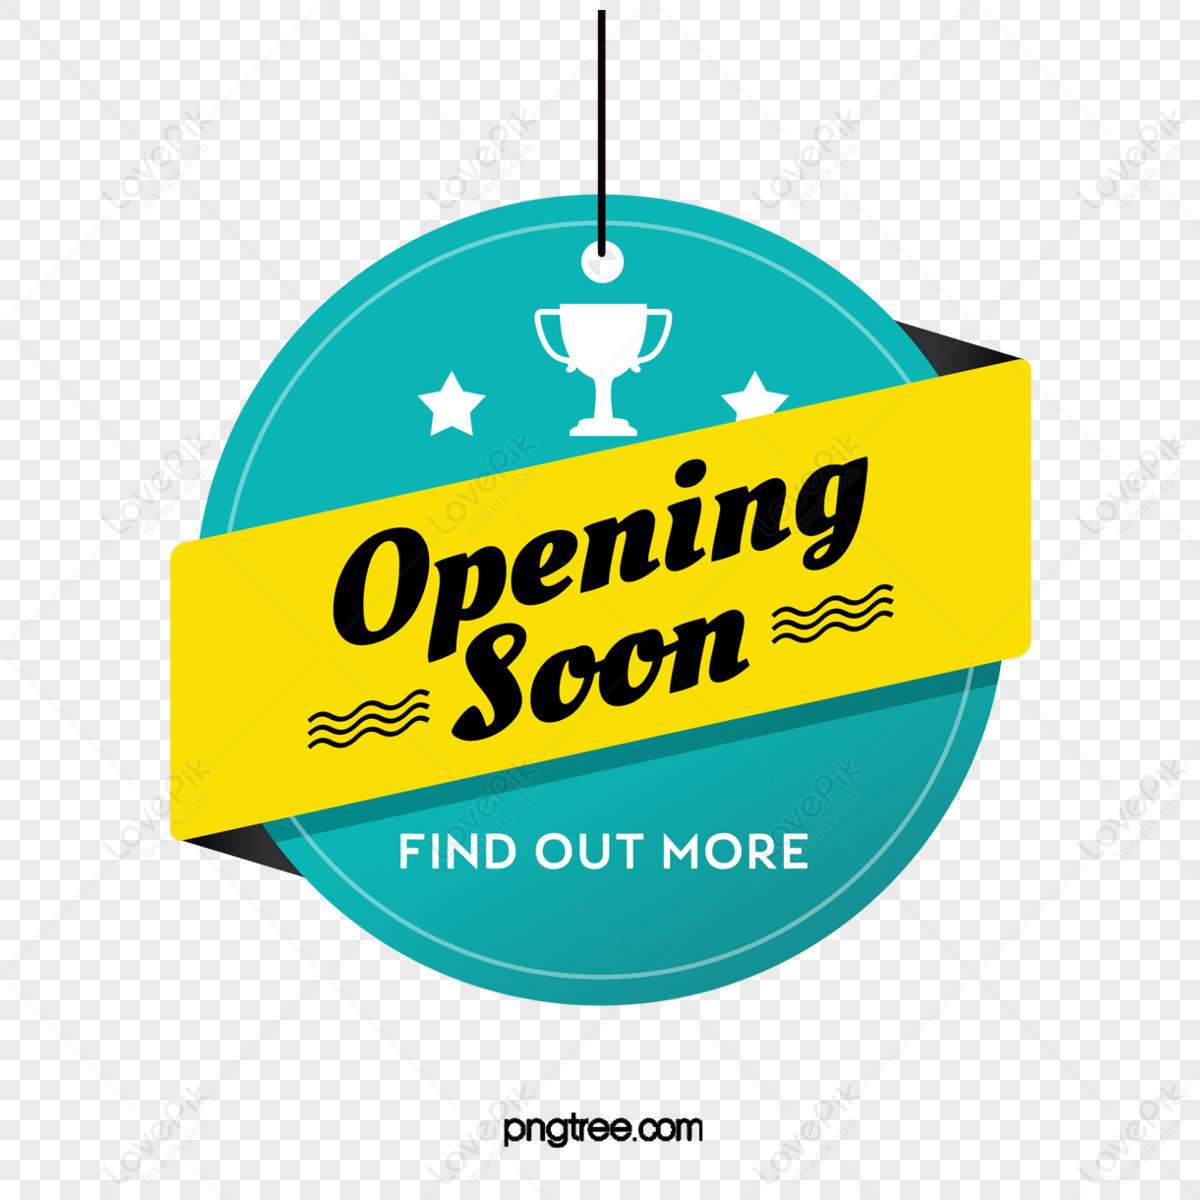 Opening soon stamp in hindi Royalty Free Vector Image